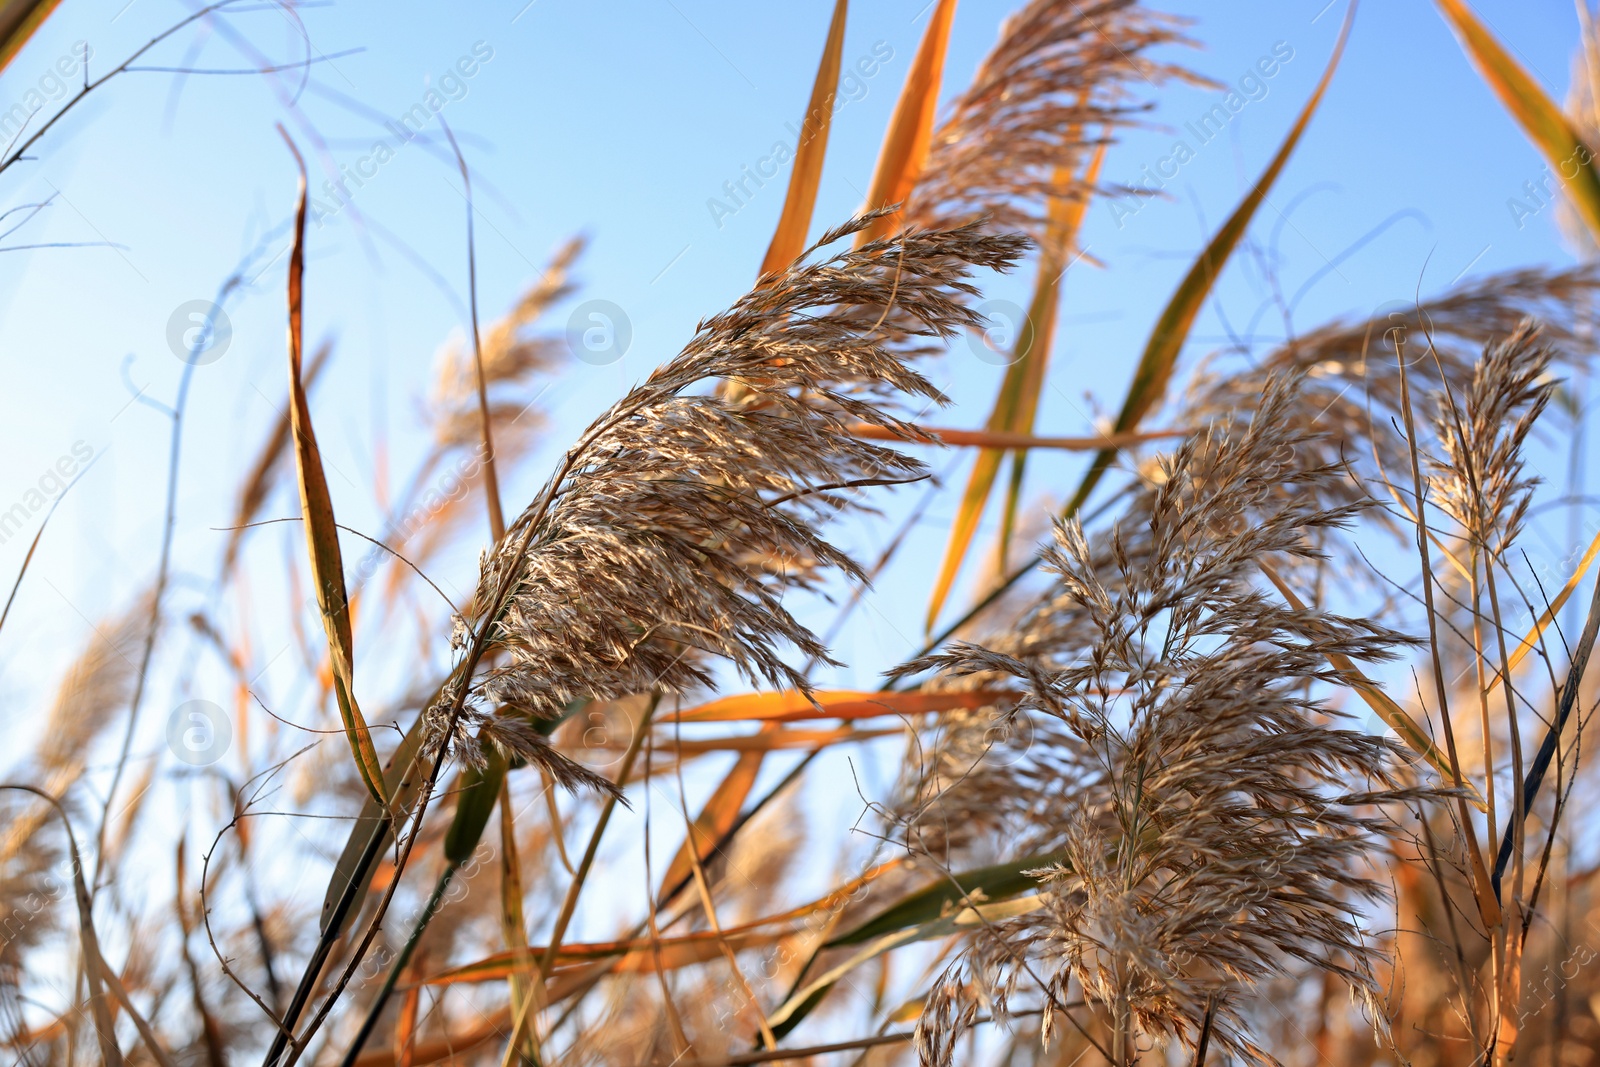 Photo of Dry reeds growing outdoors on sunny day, closeup